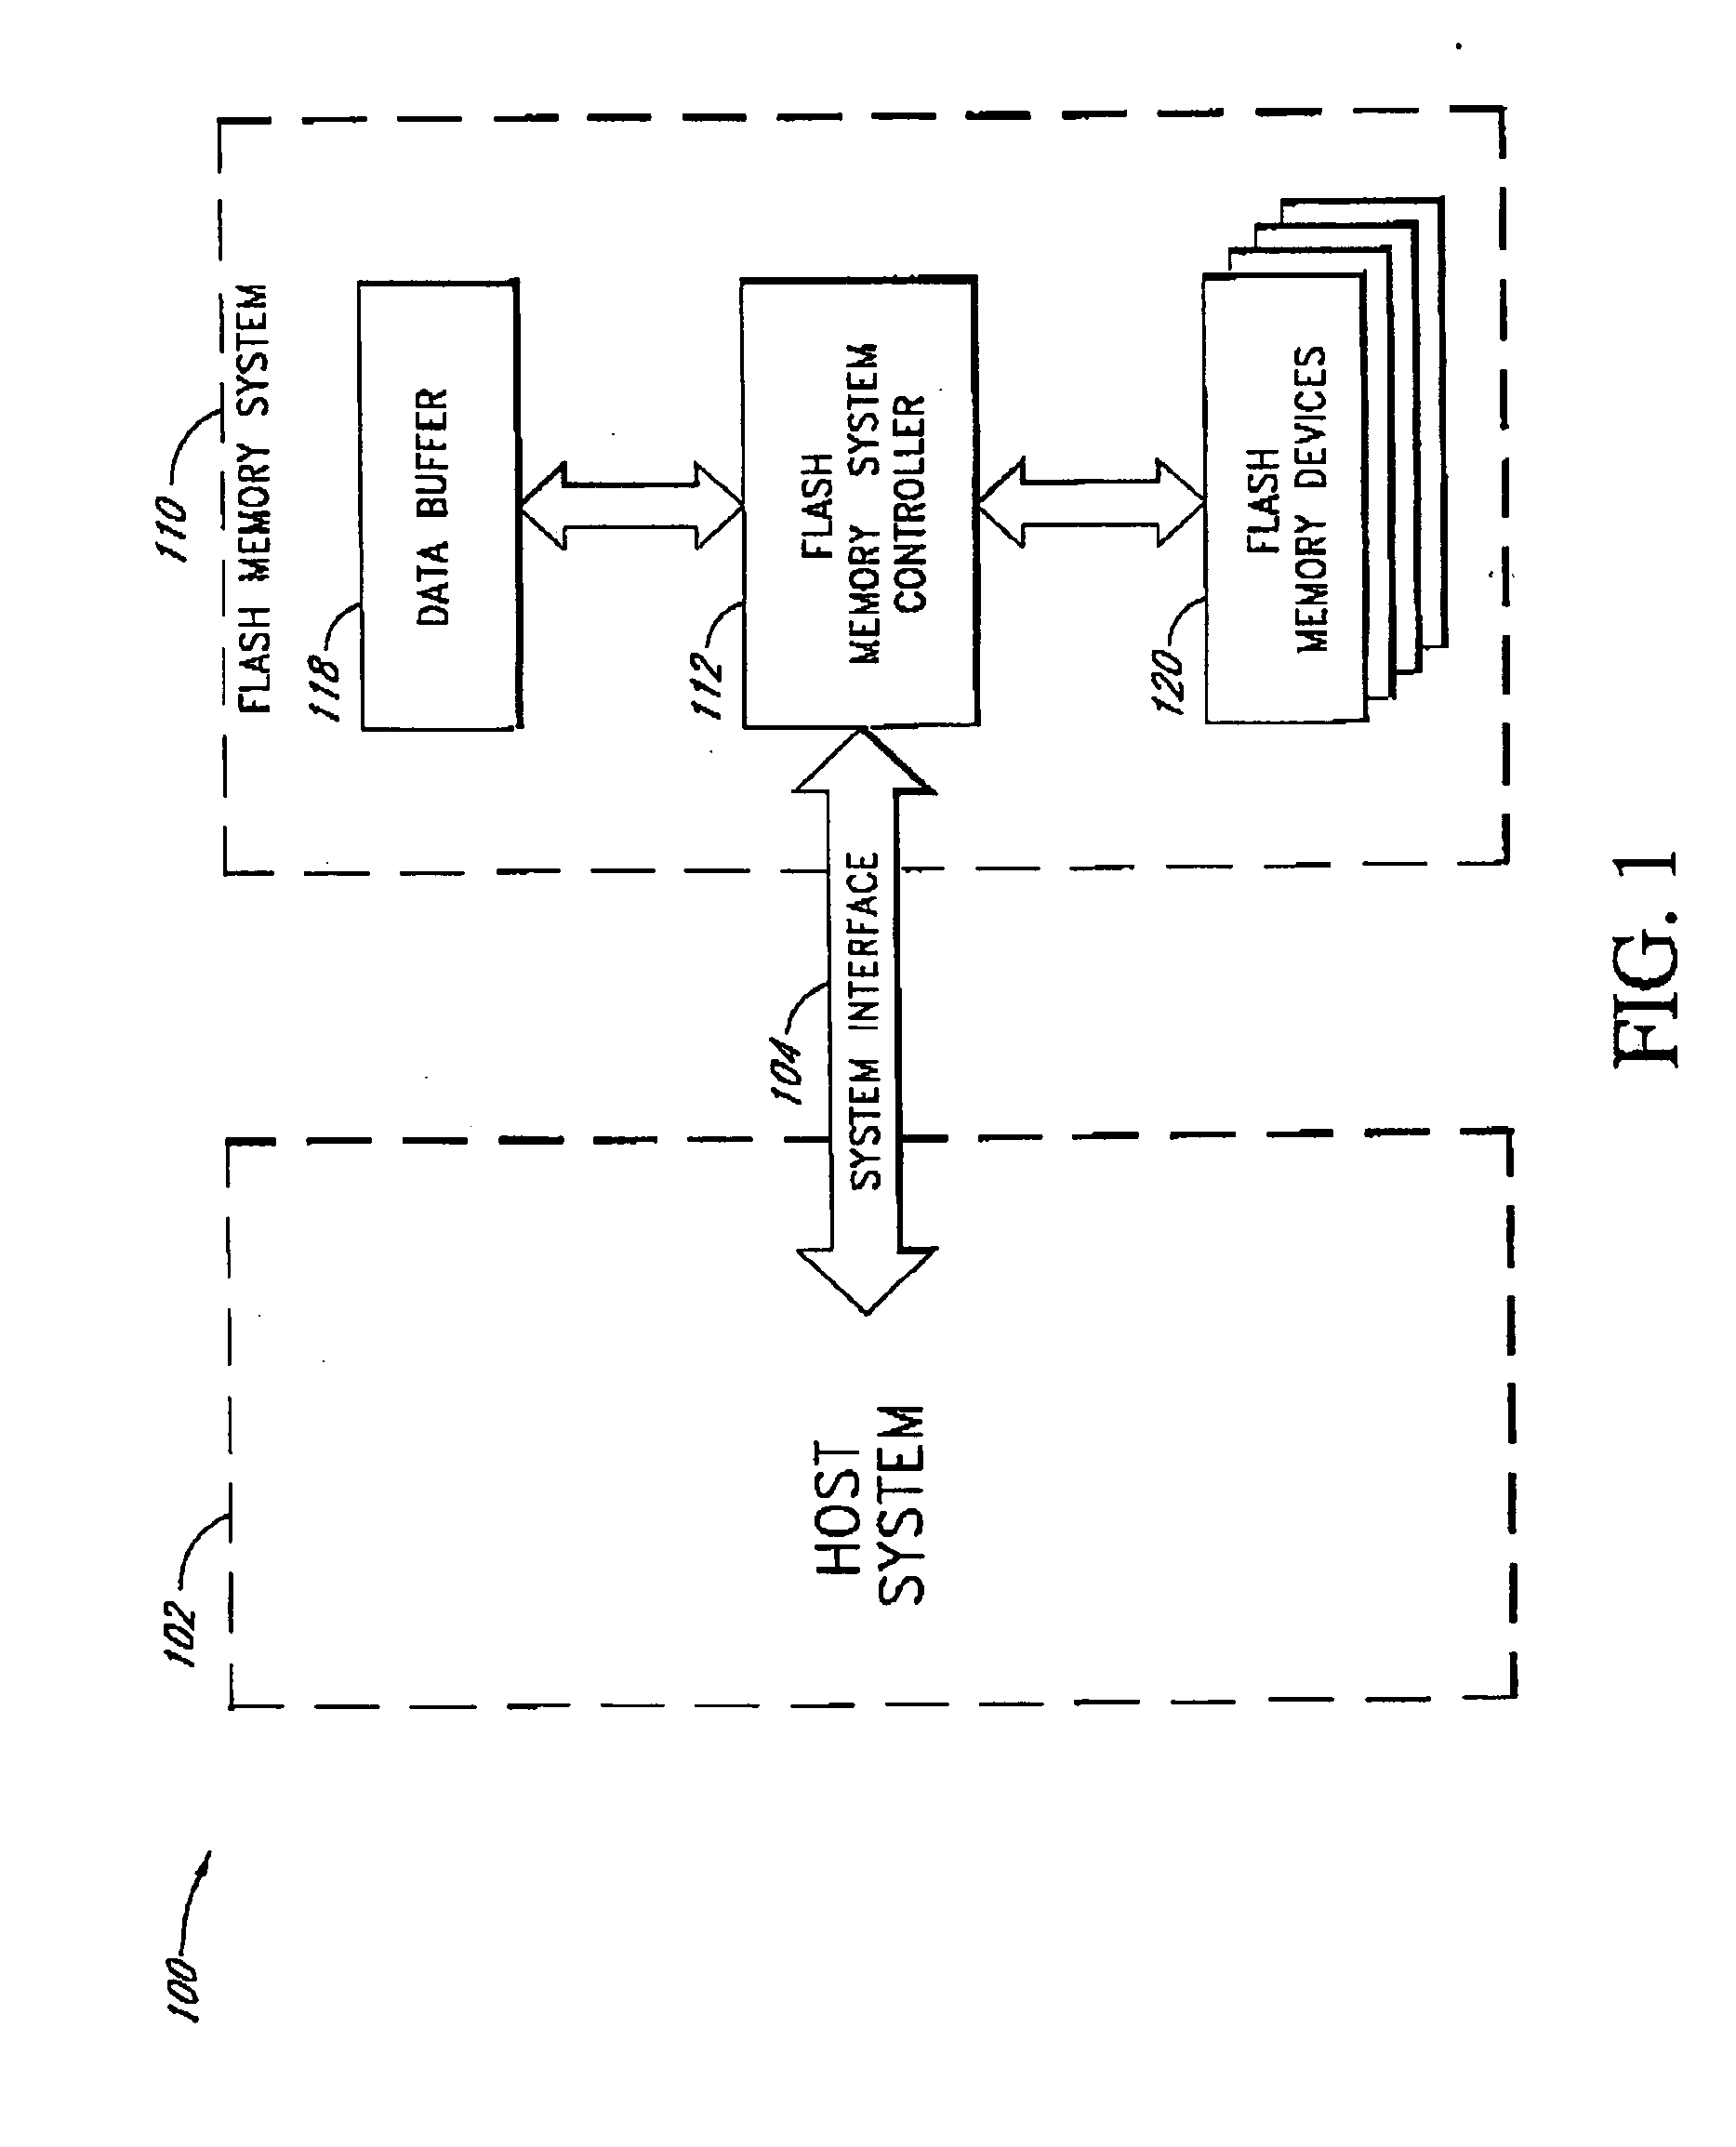 Protection against data corruption due to power failure in solid-state memory device